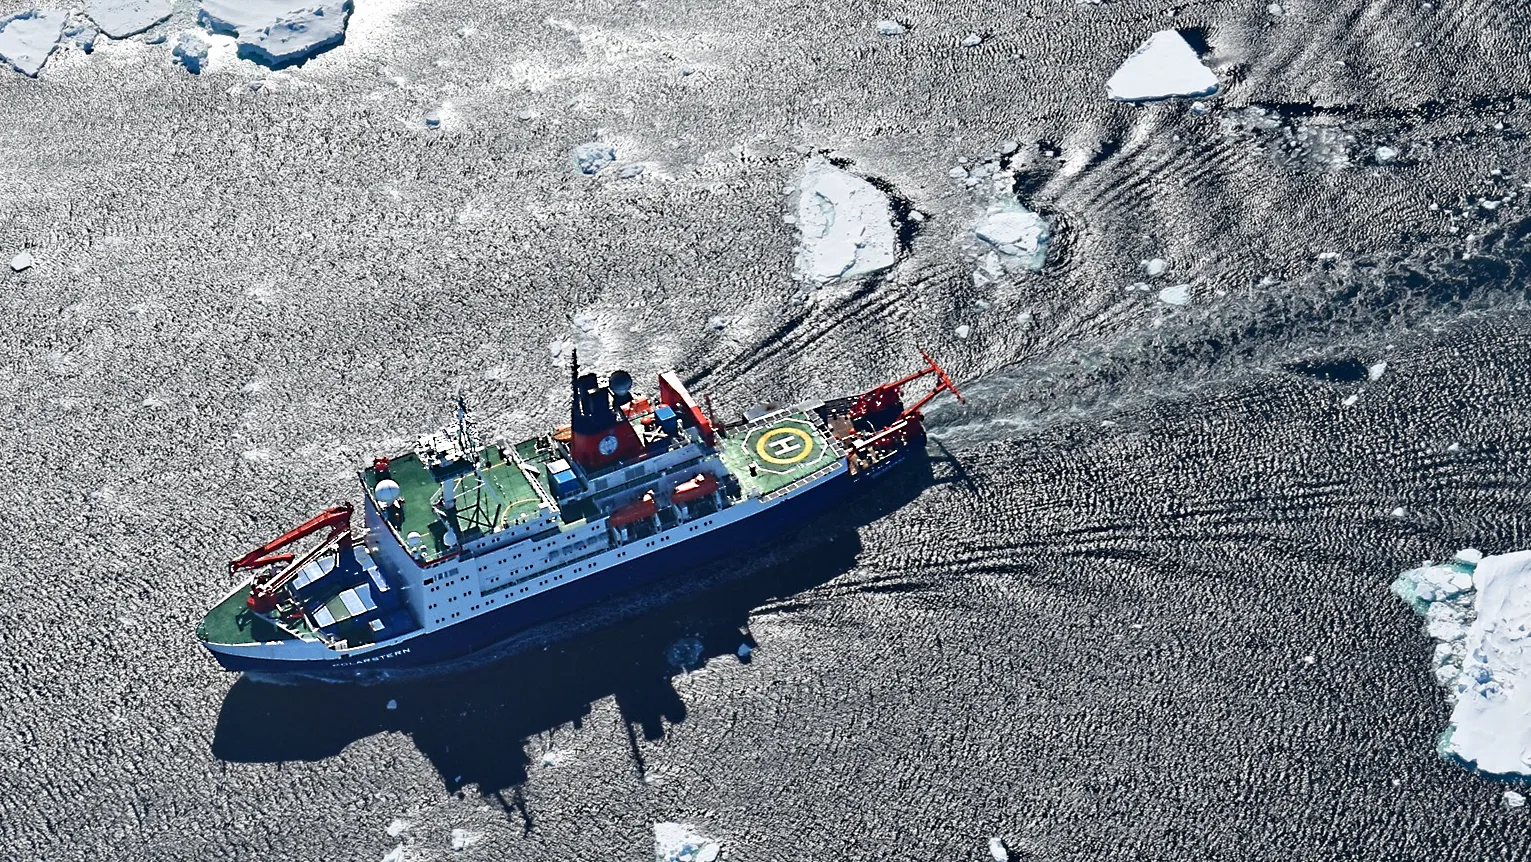 A blue and white ship seen from the air, steaming through a sea with scattered ice floes.